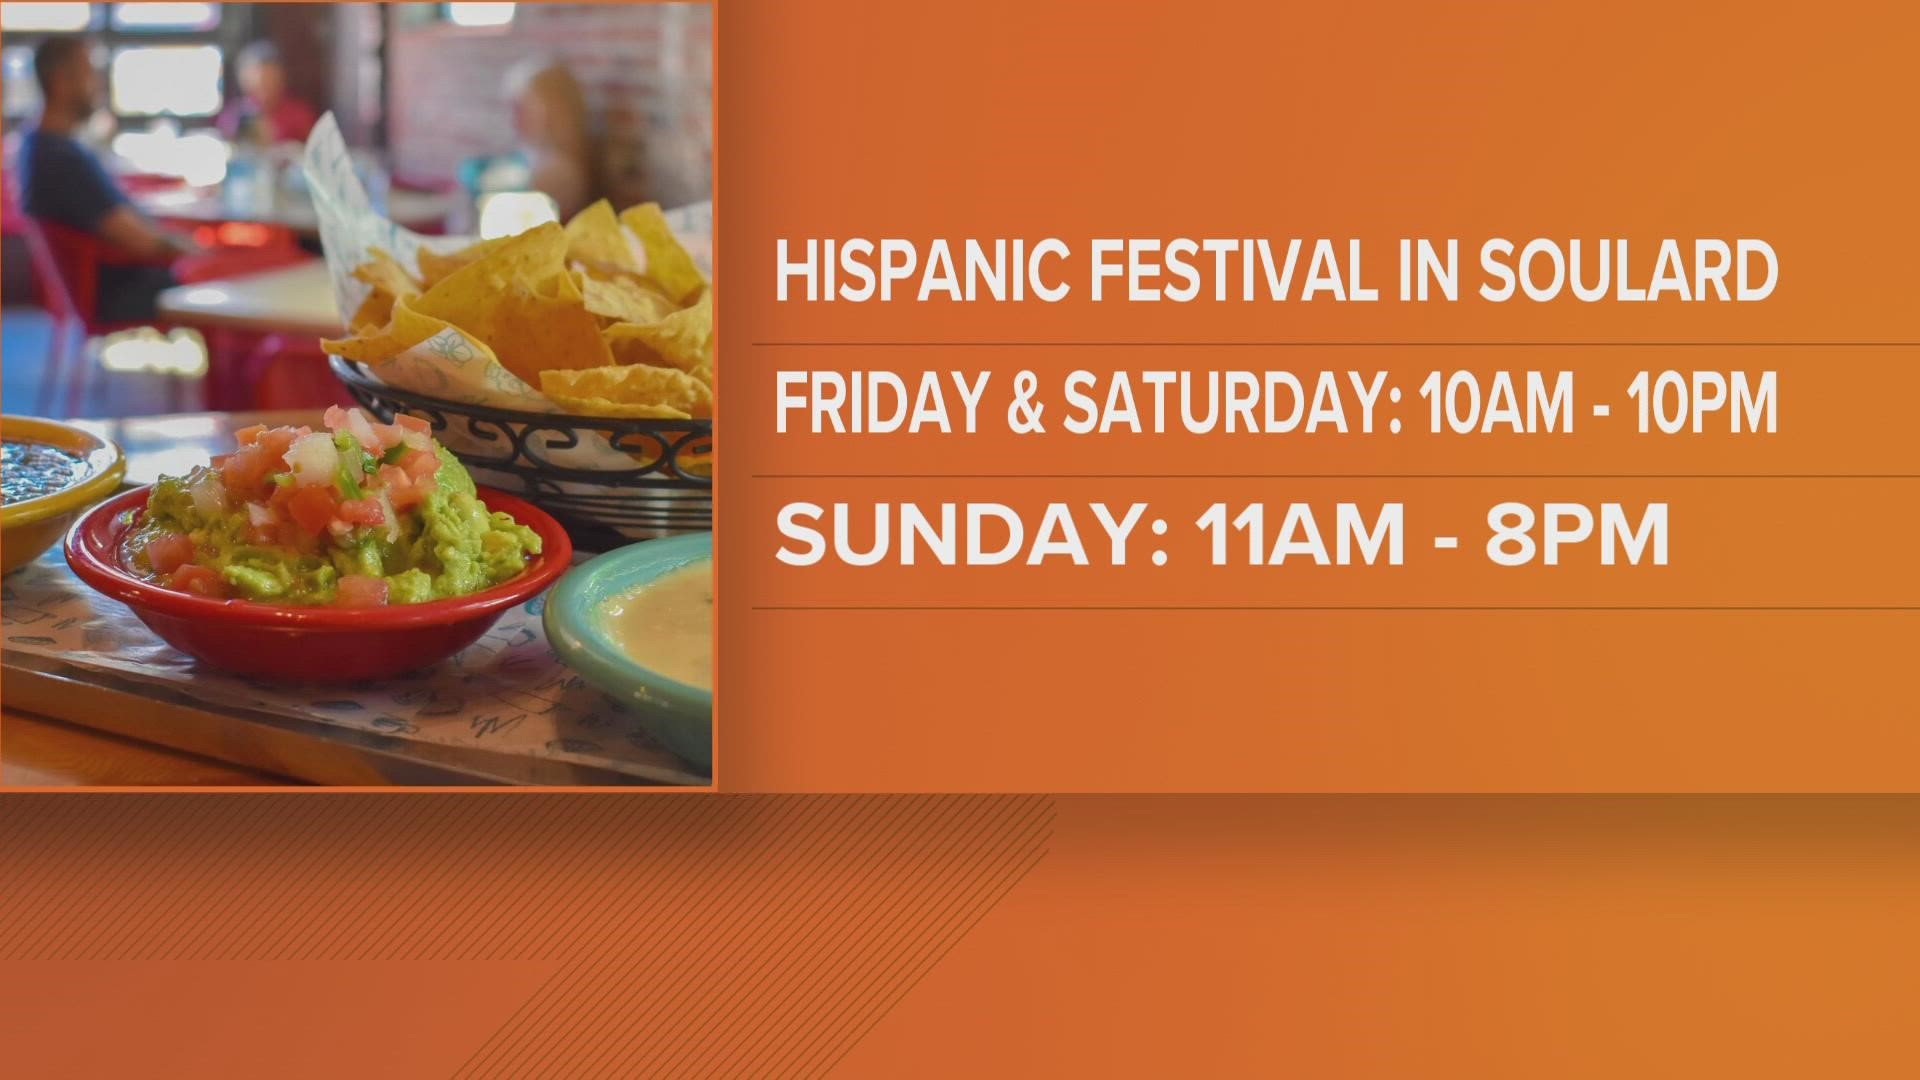 After a 2-year break, Hispanic Festival is back in Soulard. Come out this weekend to enjoy the music, the food and the Hispanic cultures.